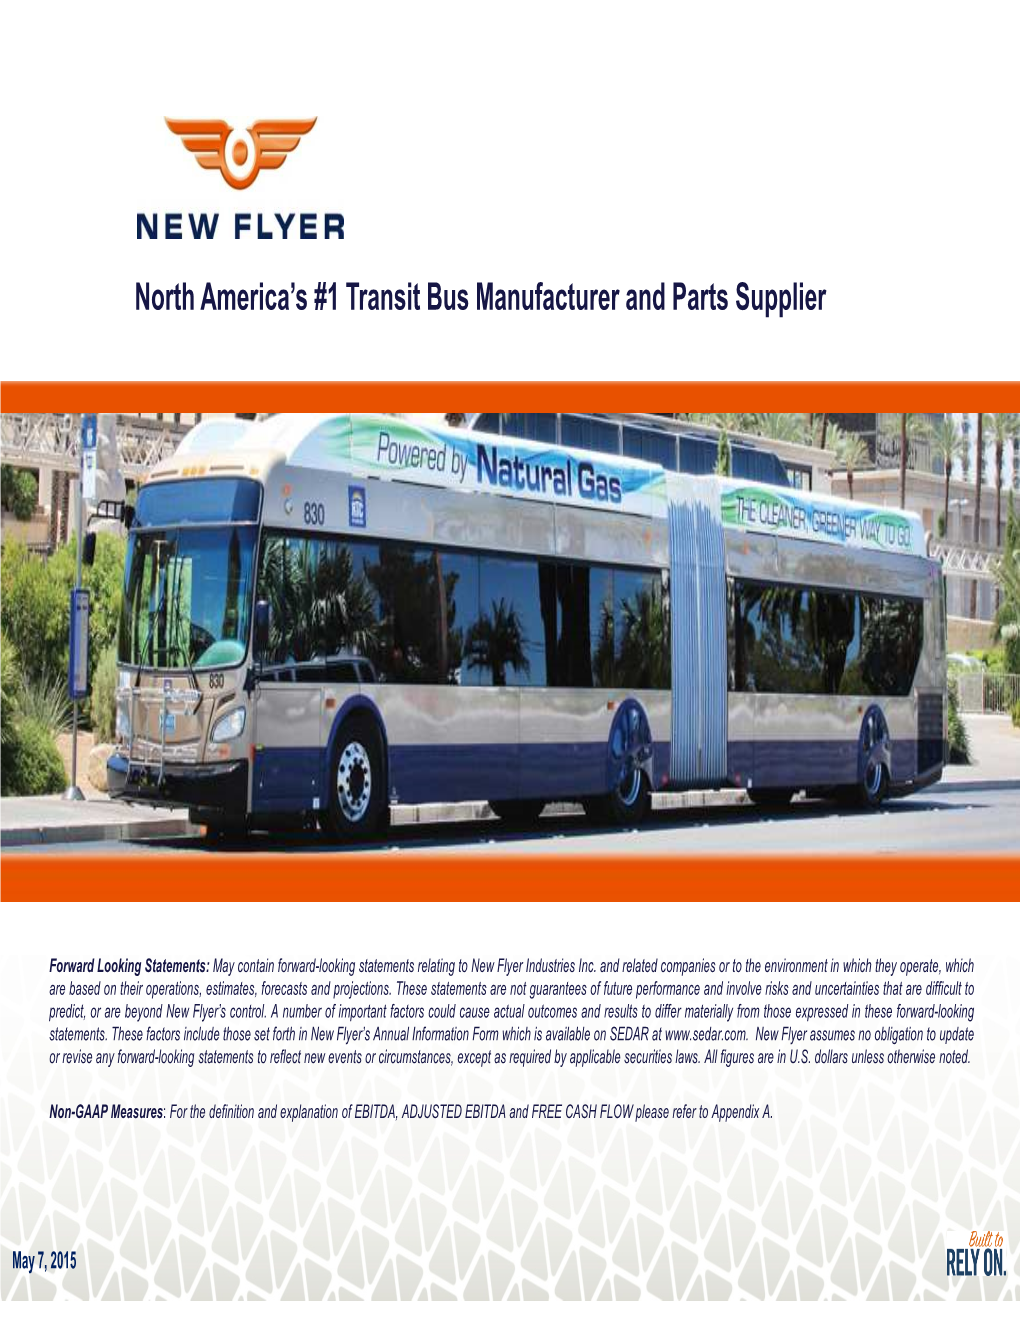 North America's #1 Transit Bus Manufacturer and Parts Supplier